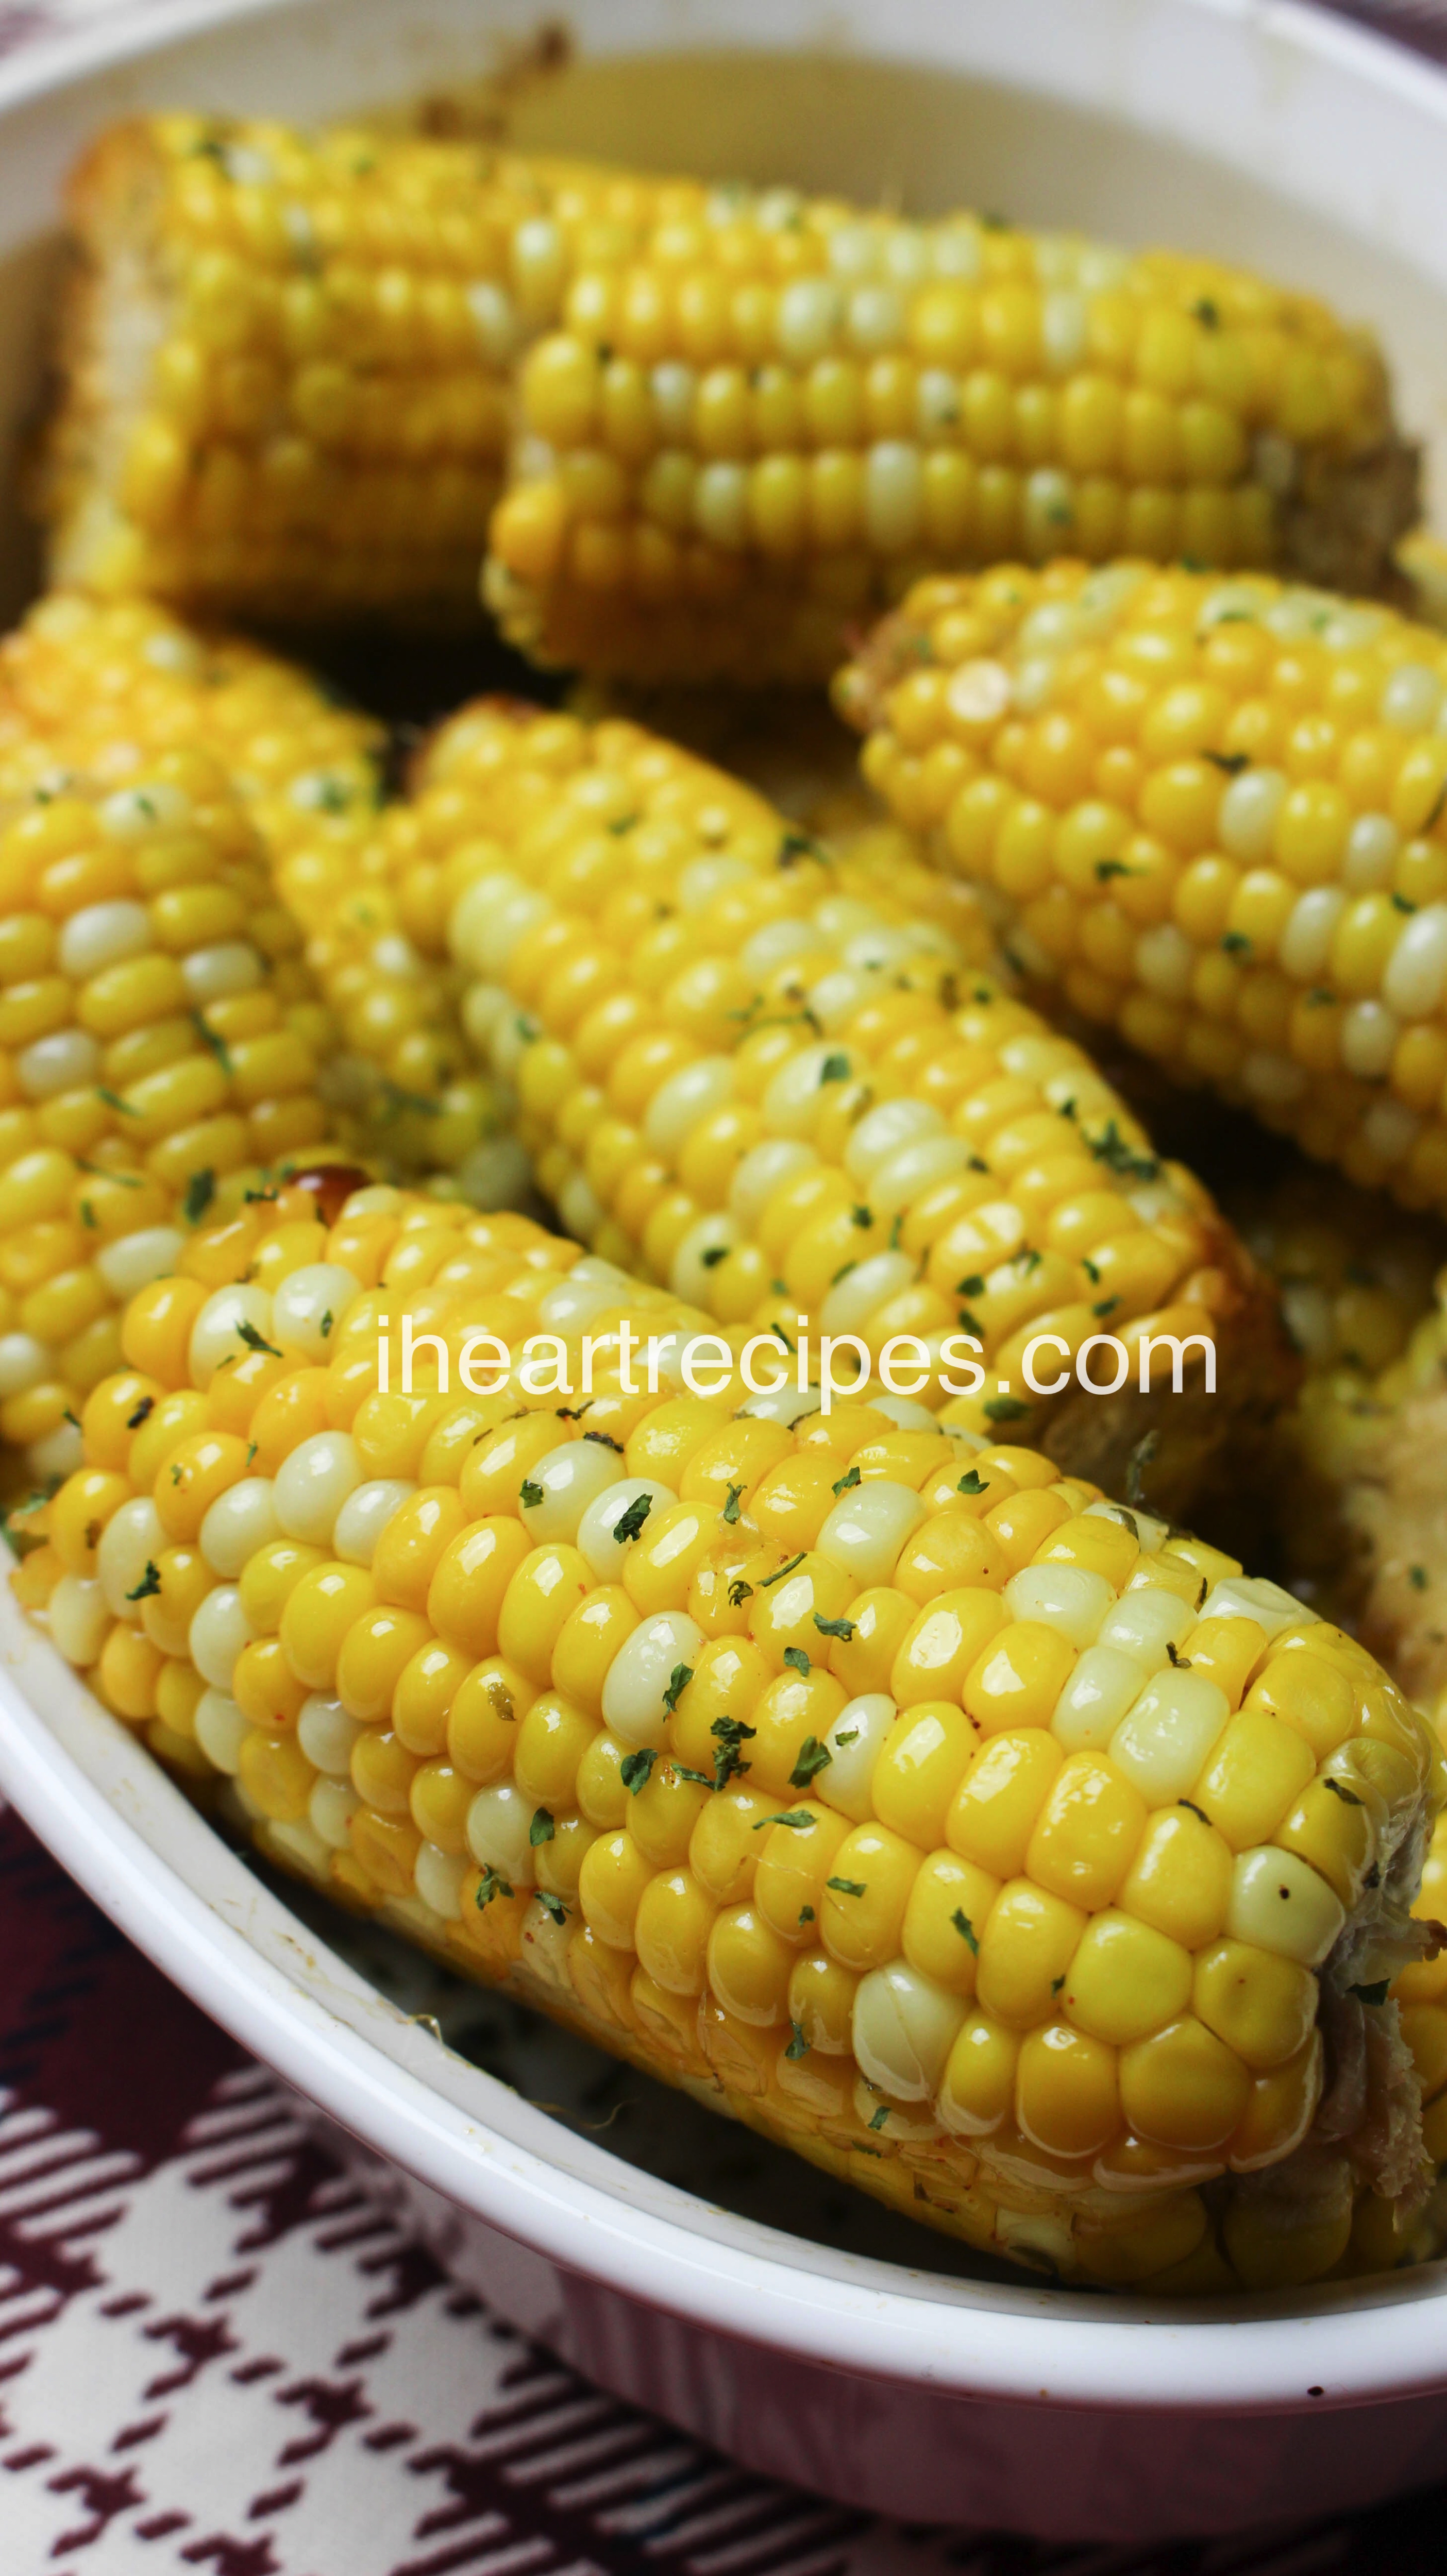 Corn on the cob oven baked